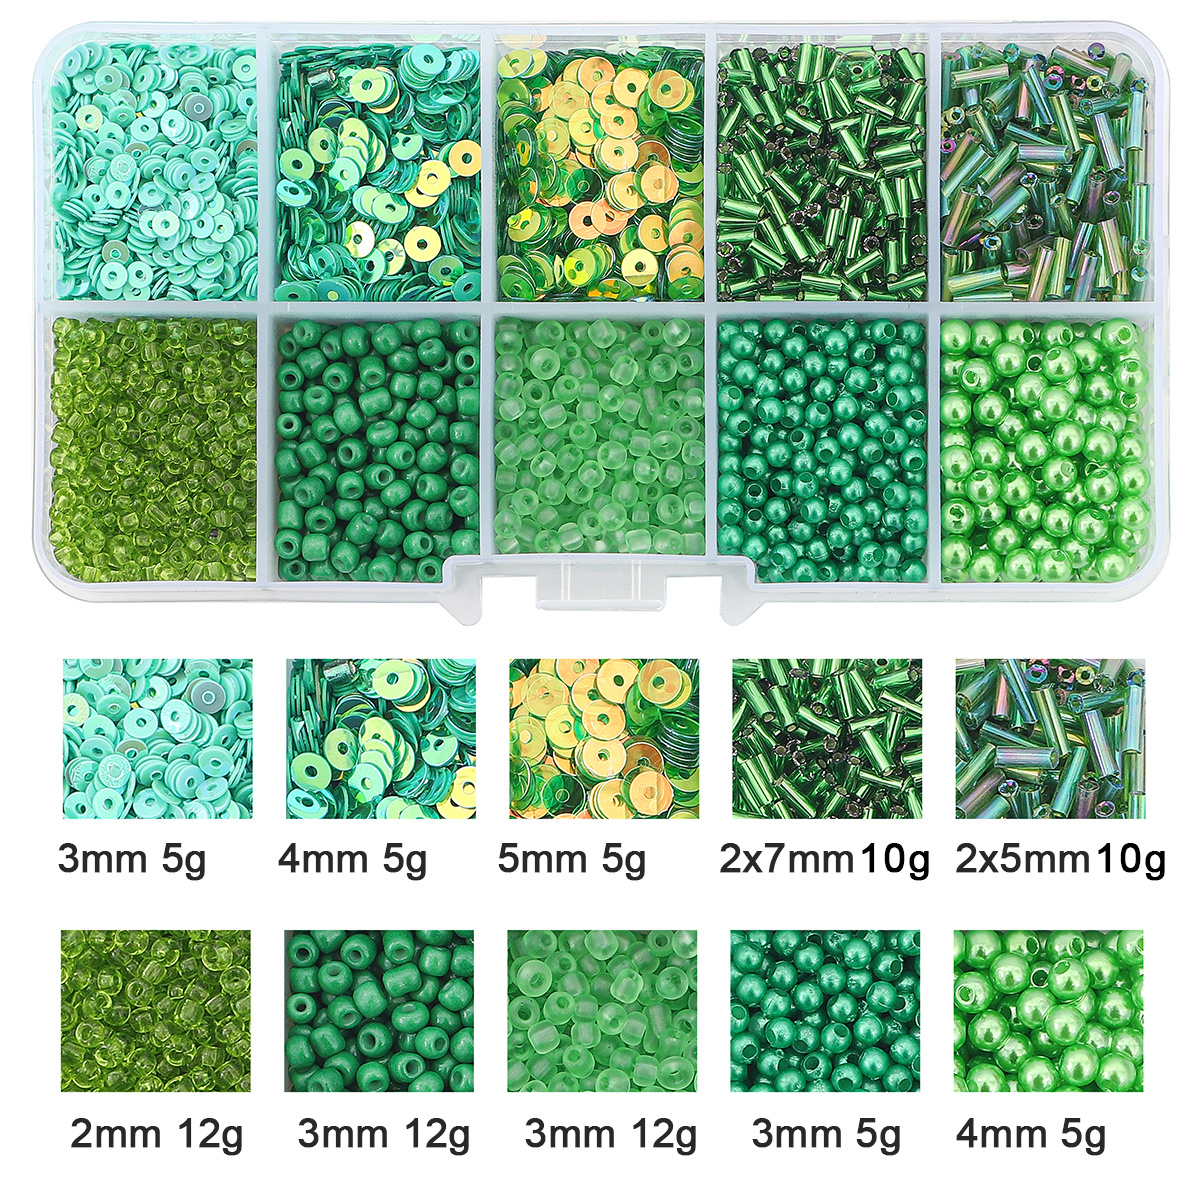 Crystal Glass Seed Beads 2mm, Glass Jewelry Making Rings